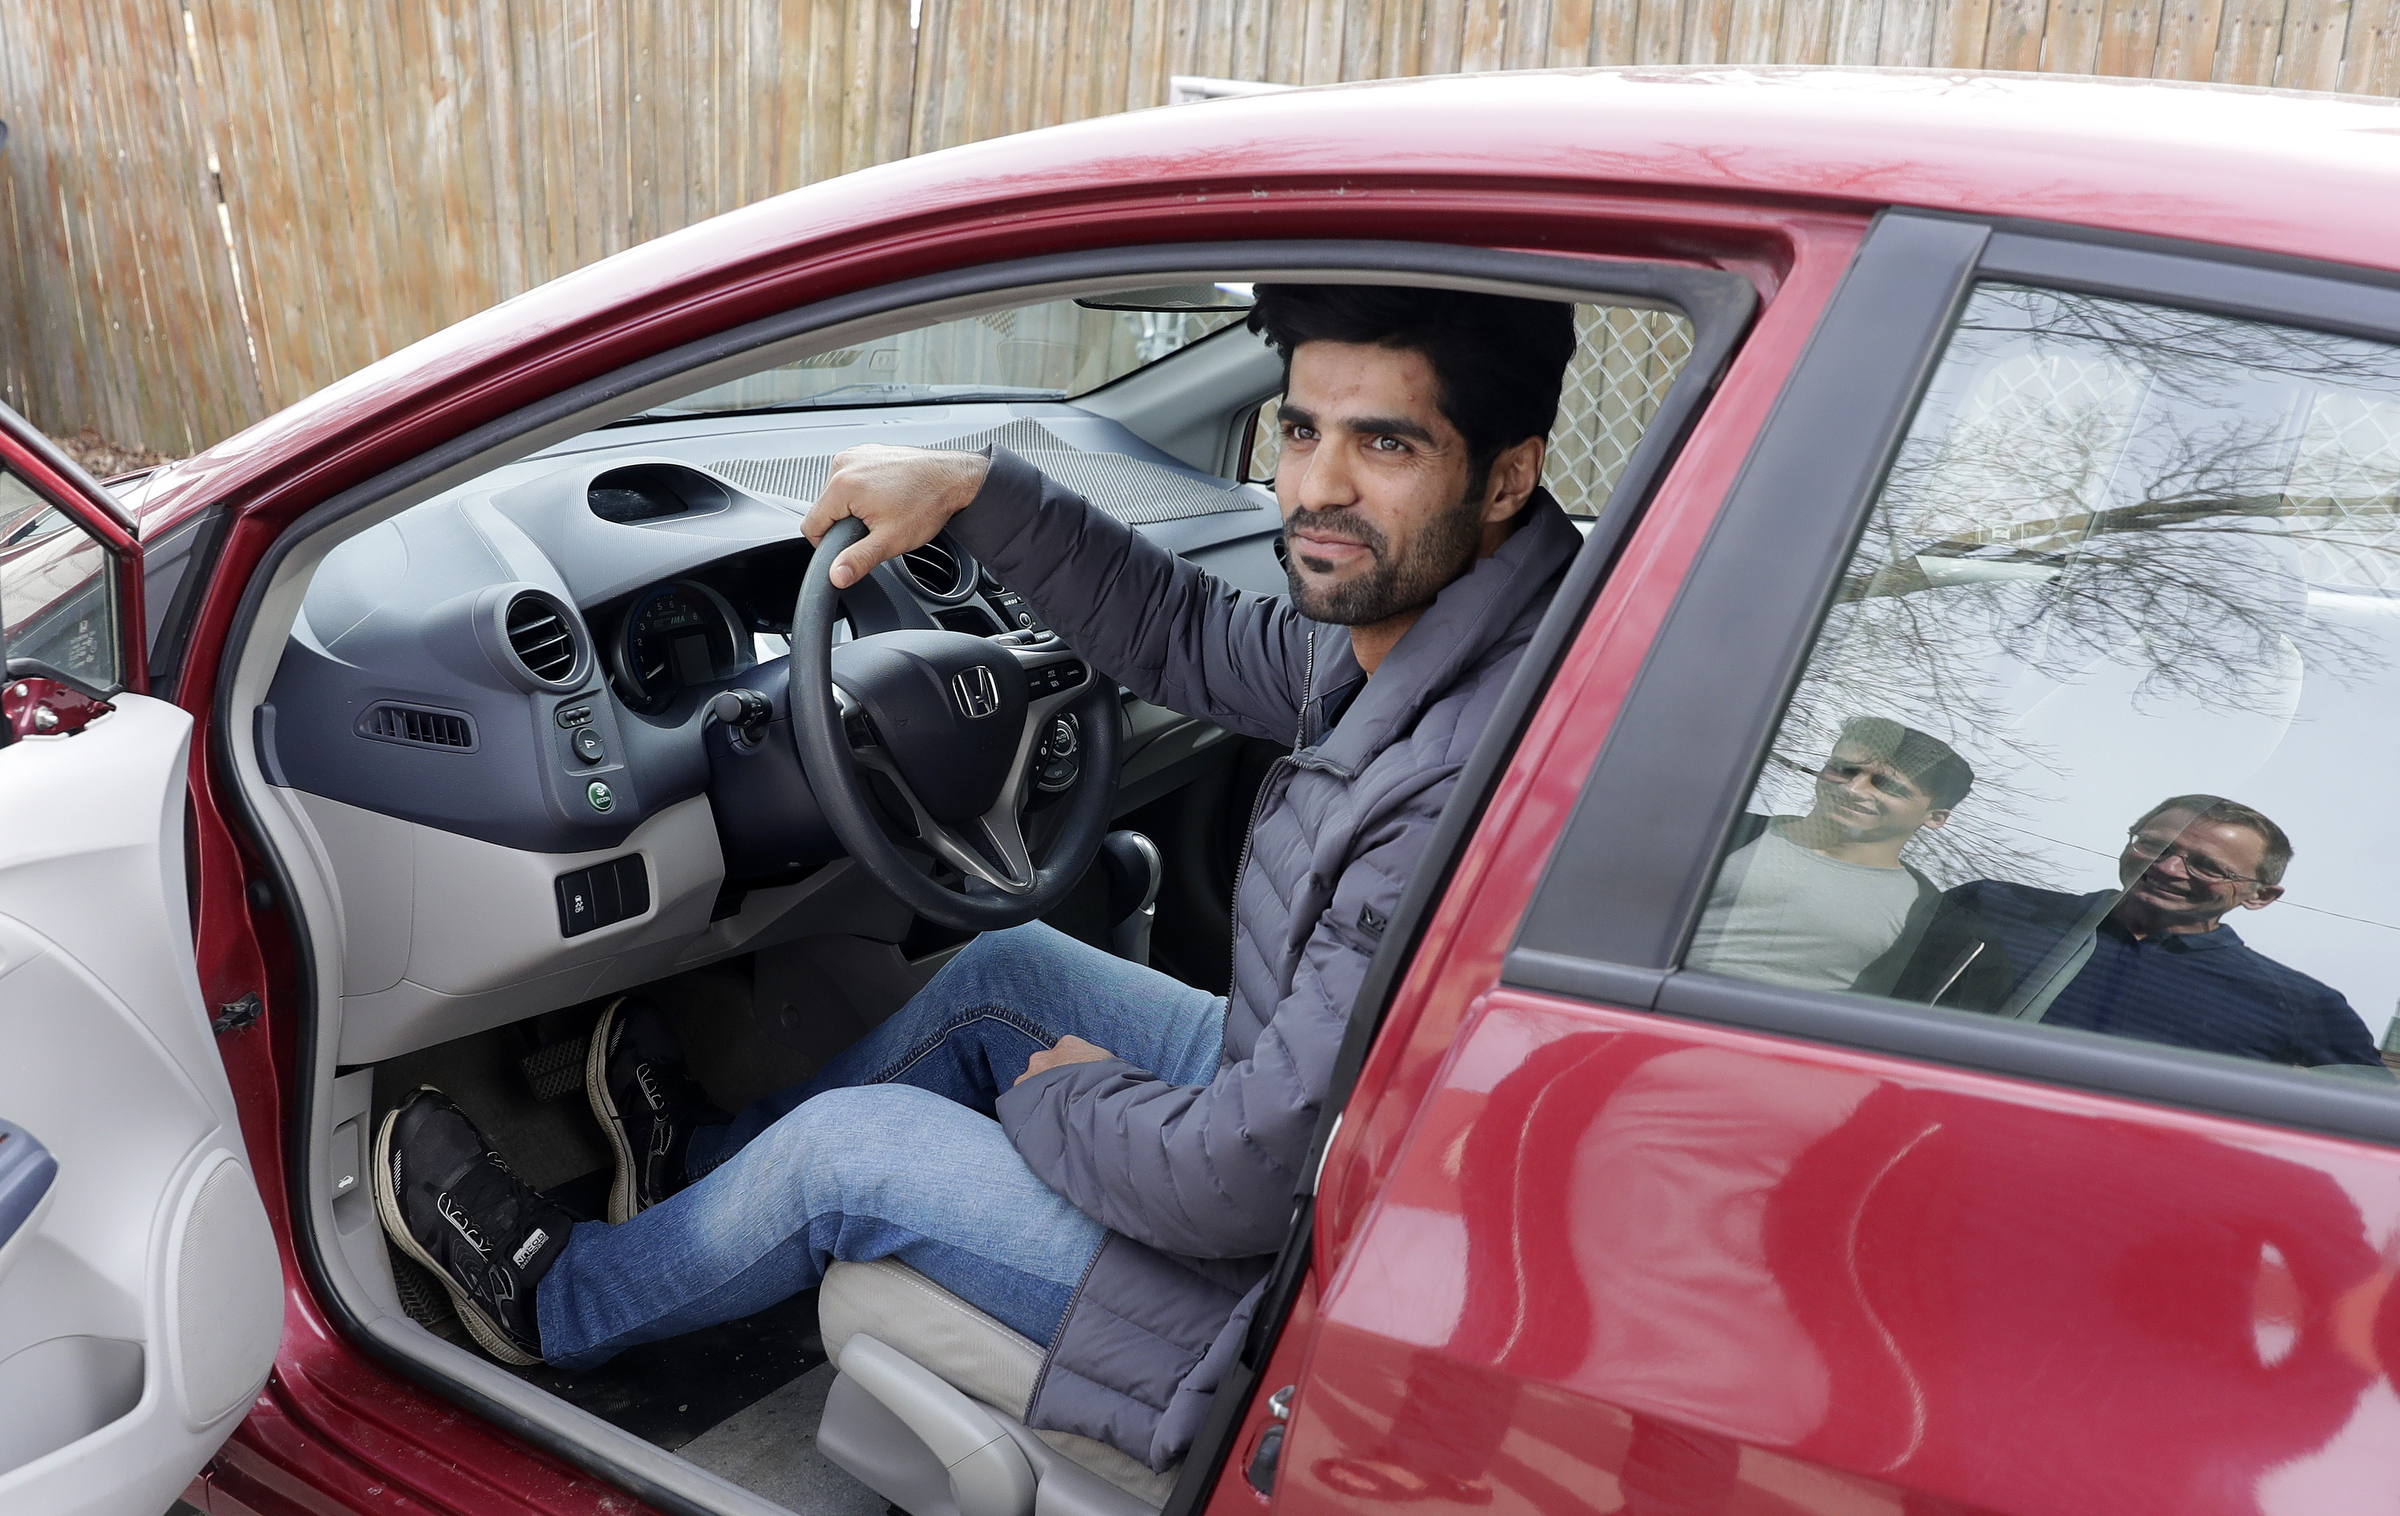 After receiving his driver's license earlier in the year, Ahmad Samim Samimi tests out a vehicle